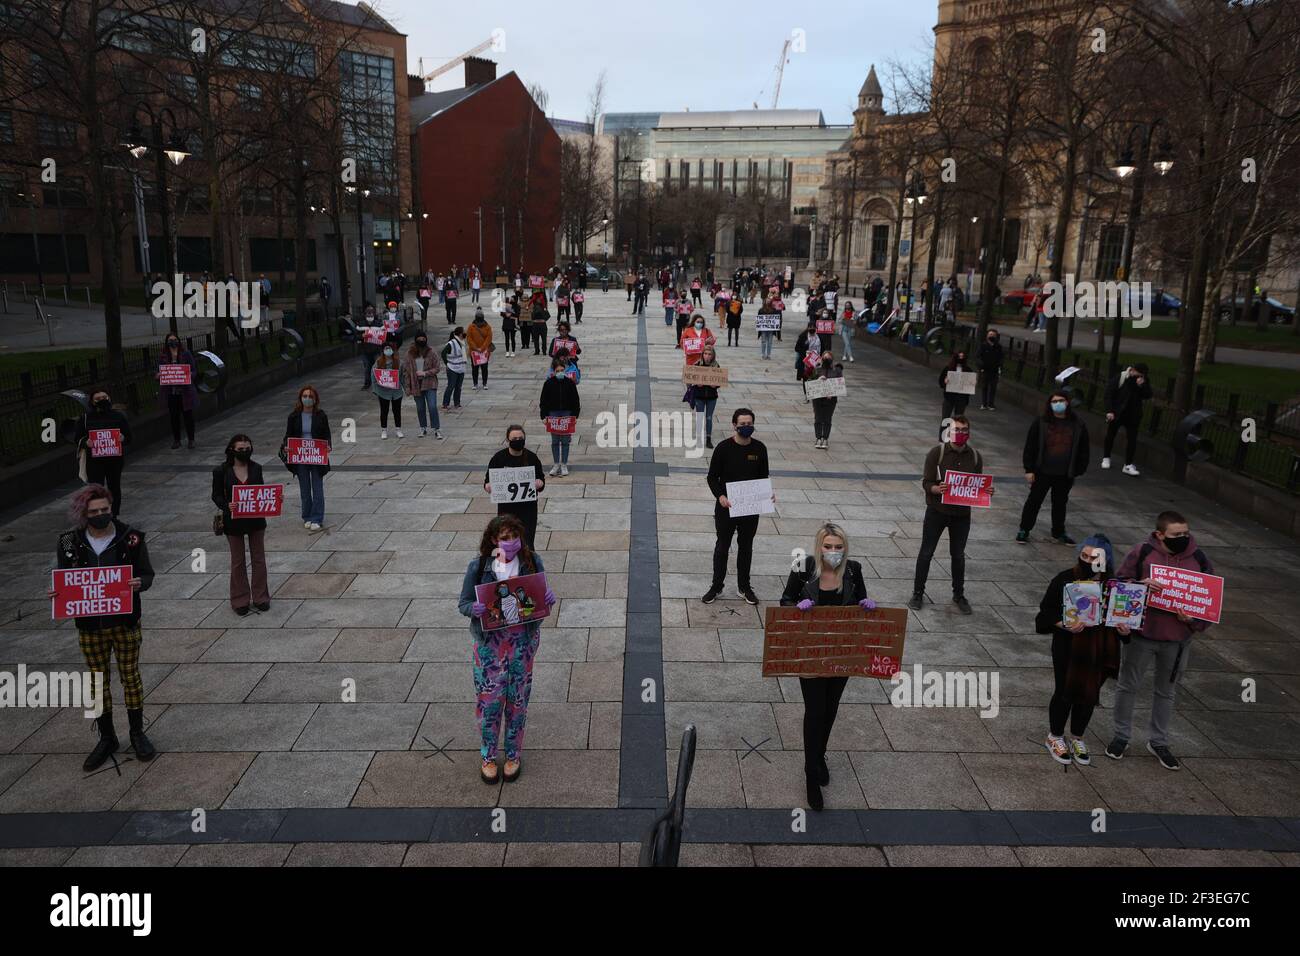 People in Writer's Square, Belfast, taking part in a demonstration against gender violence and to defend the right to protest following the murder of Sarah Everard and subsequent police actions at a vigil in London. Picture date: Tuesday March 16, 2021. Stock Photo